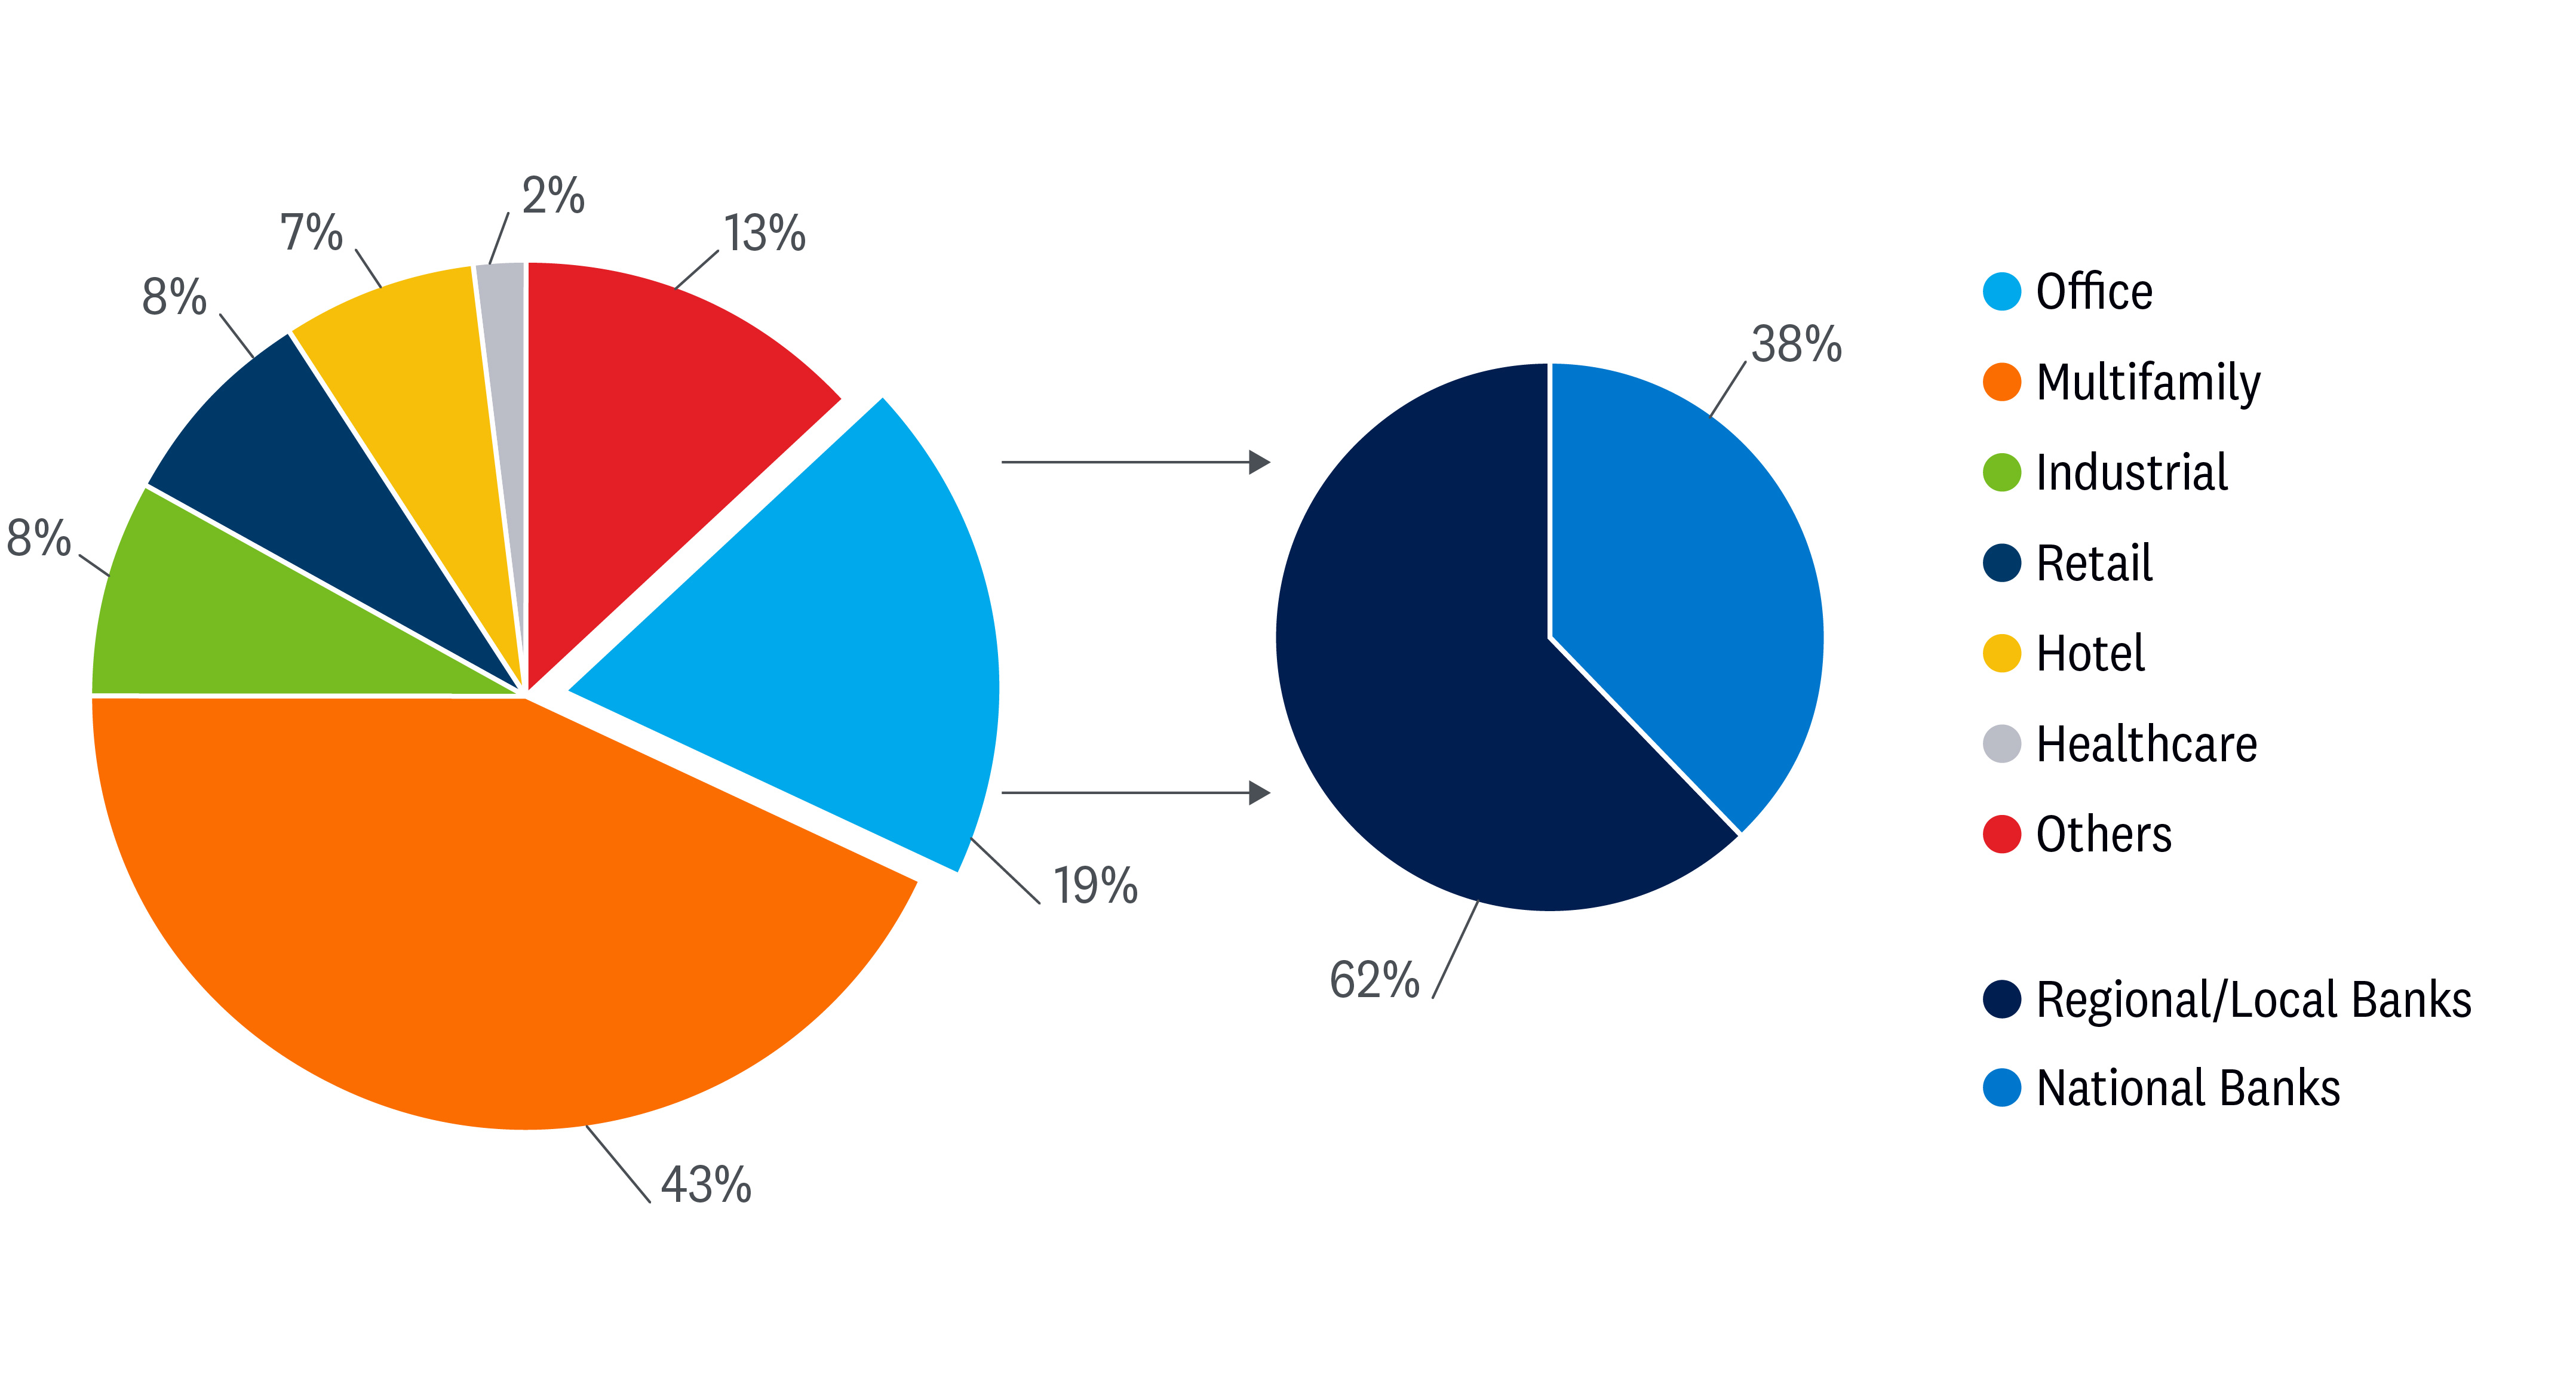 Pie chart of U.S. commercial loans depicting the office sector makes up 19% of those loans and regional banks account for 62% of office lending. 